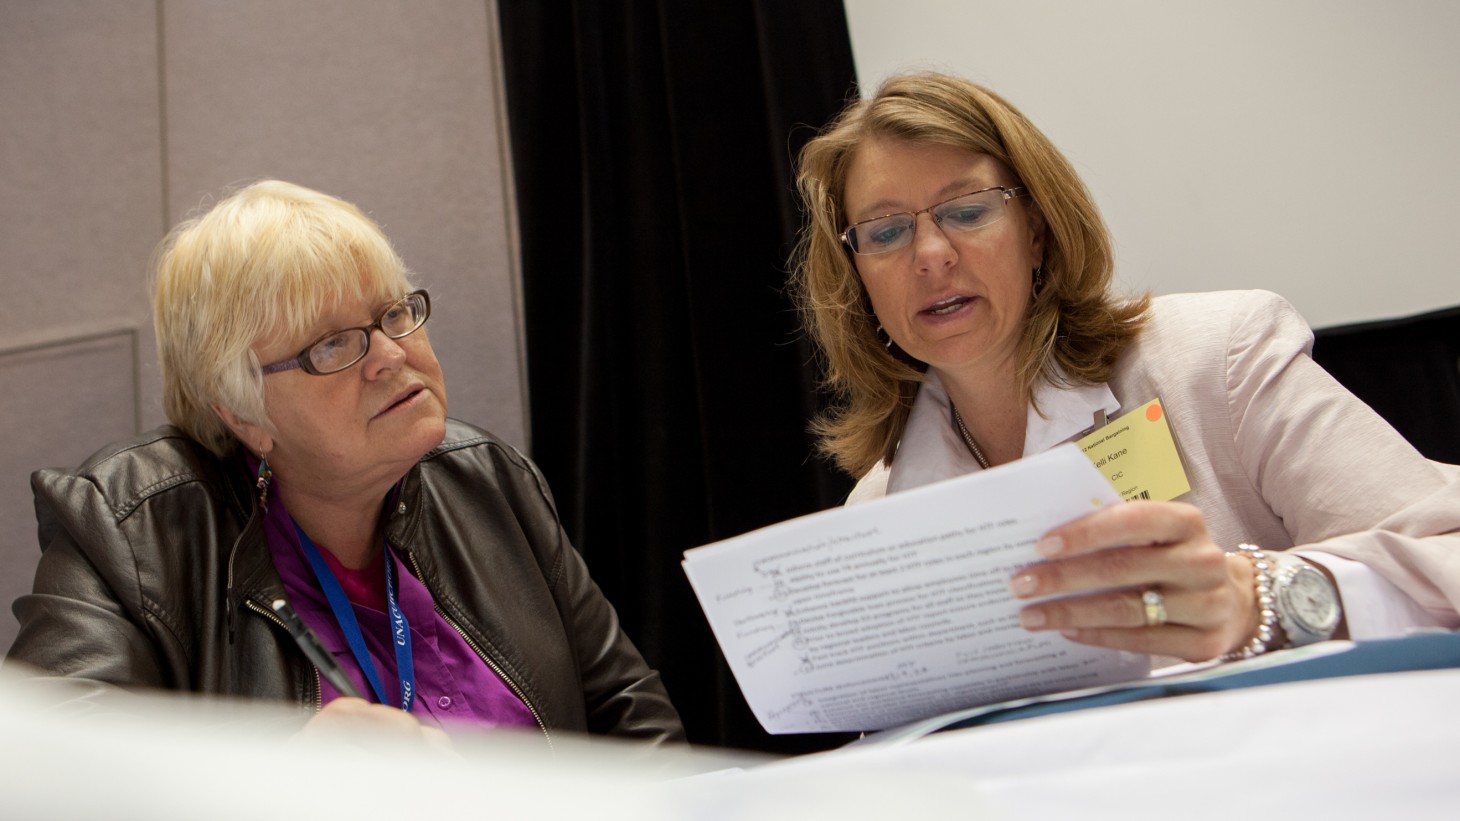 Alt text=” “Two women at a table, reviewing a document together 